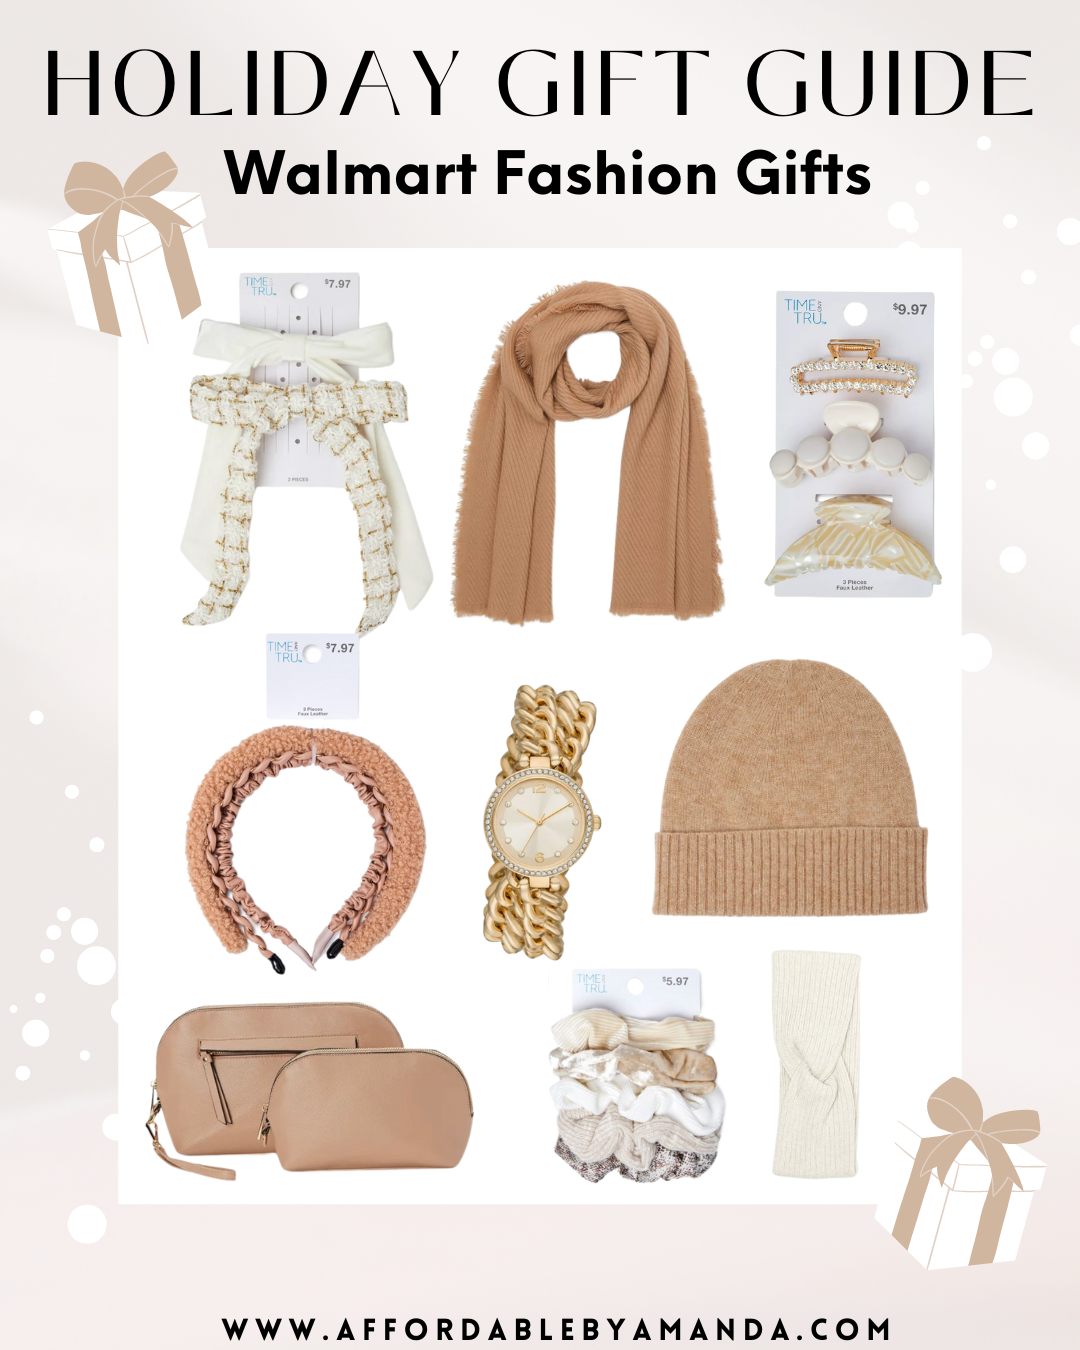 Walmart Gift Guide 2022 - Christmas & Holiday Gift Guide – Walmart.com | Fashion Gifts from Walmart for Her 2022 | Walmart Gift Ideas for Her